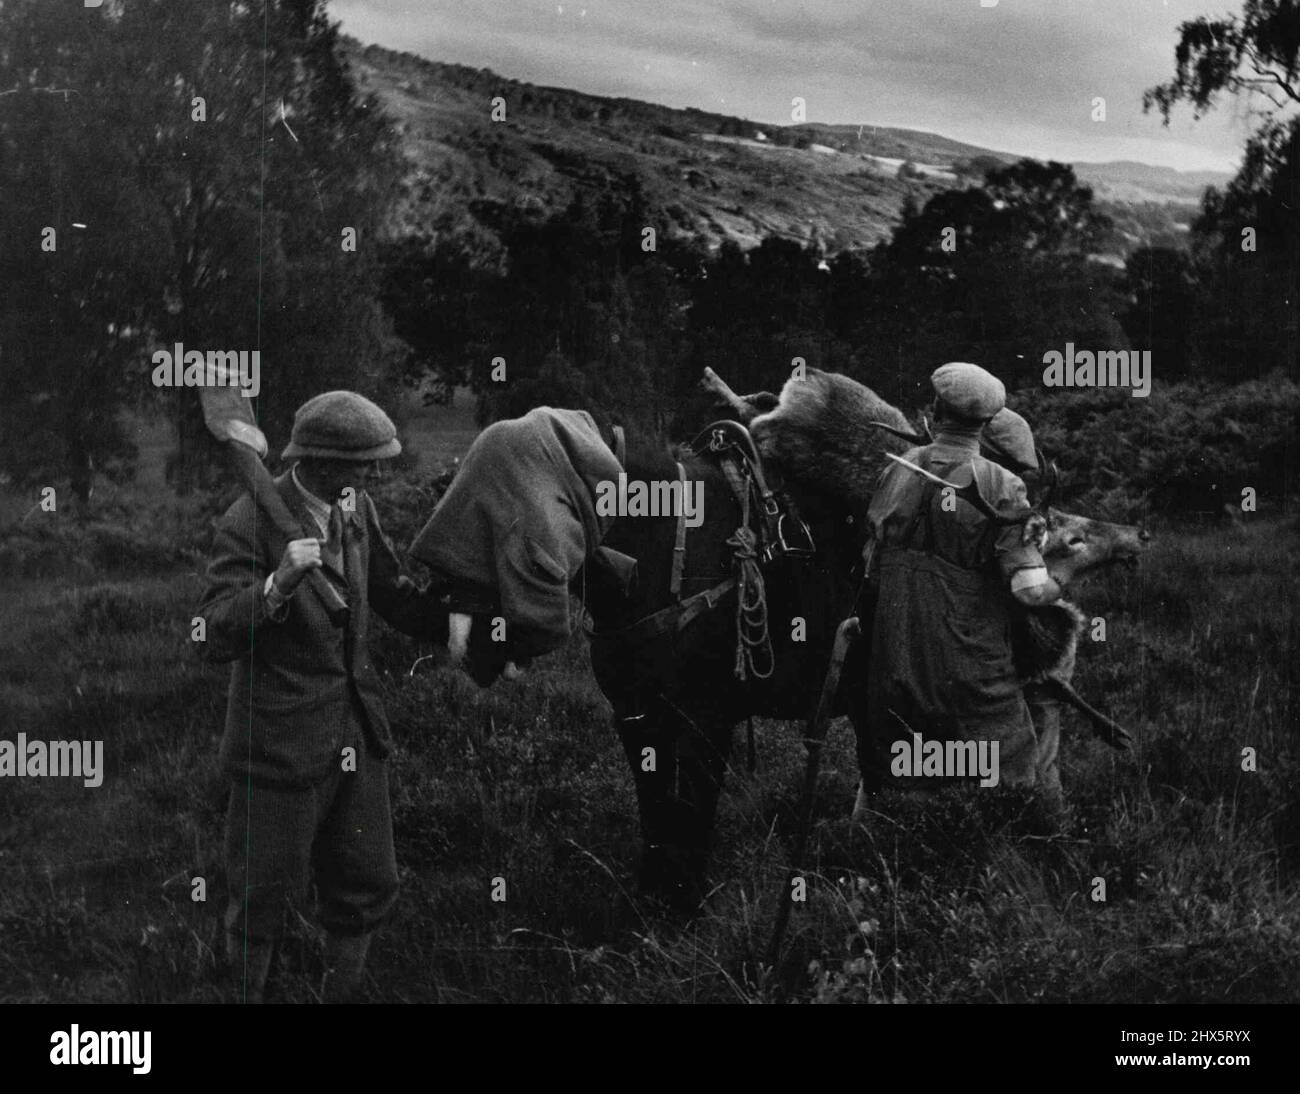 Stag Hunting - Sport - Misc. January 09, 1944. (Photo by Paul Popper). Stock Photo